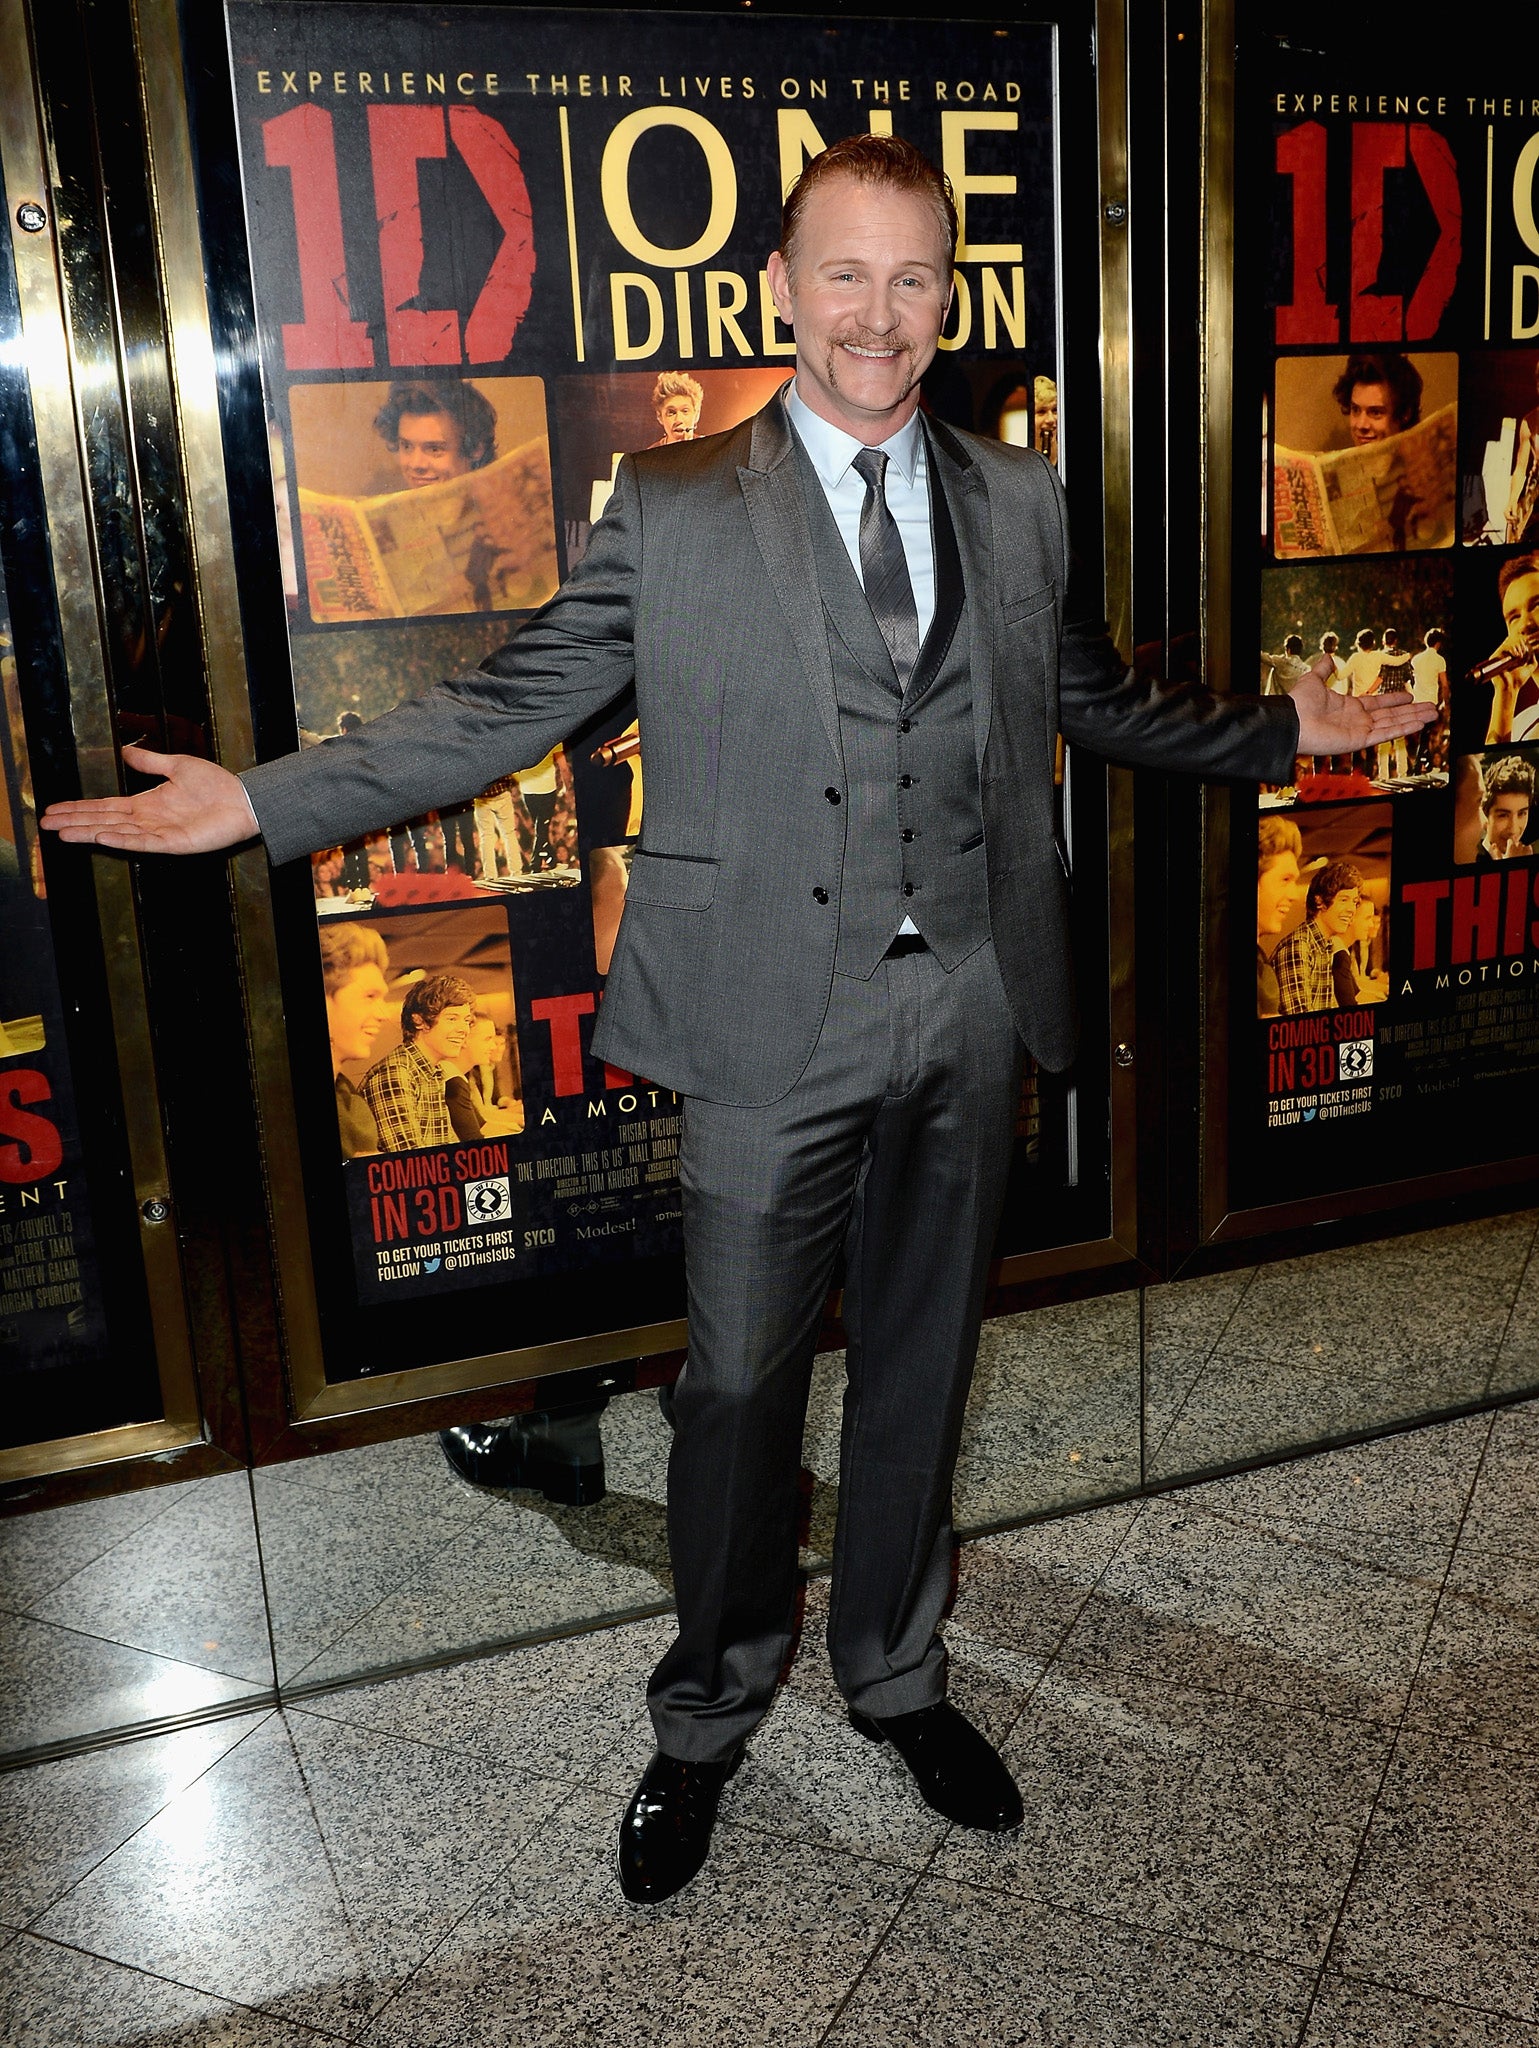 Director Morgan Spurlock at the 'One Direction This Is Us' world premiere